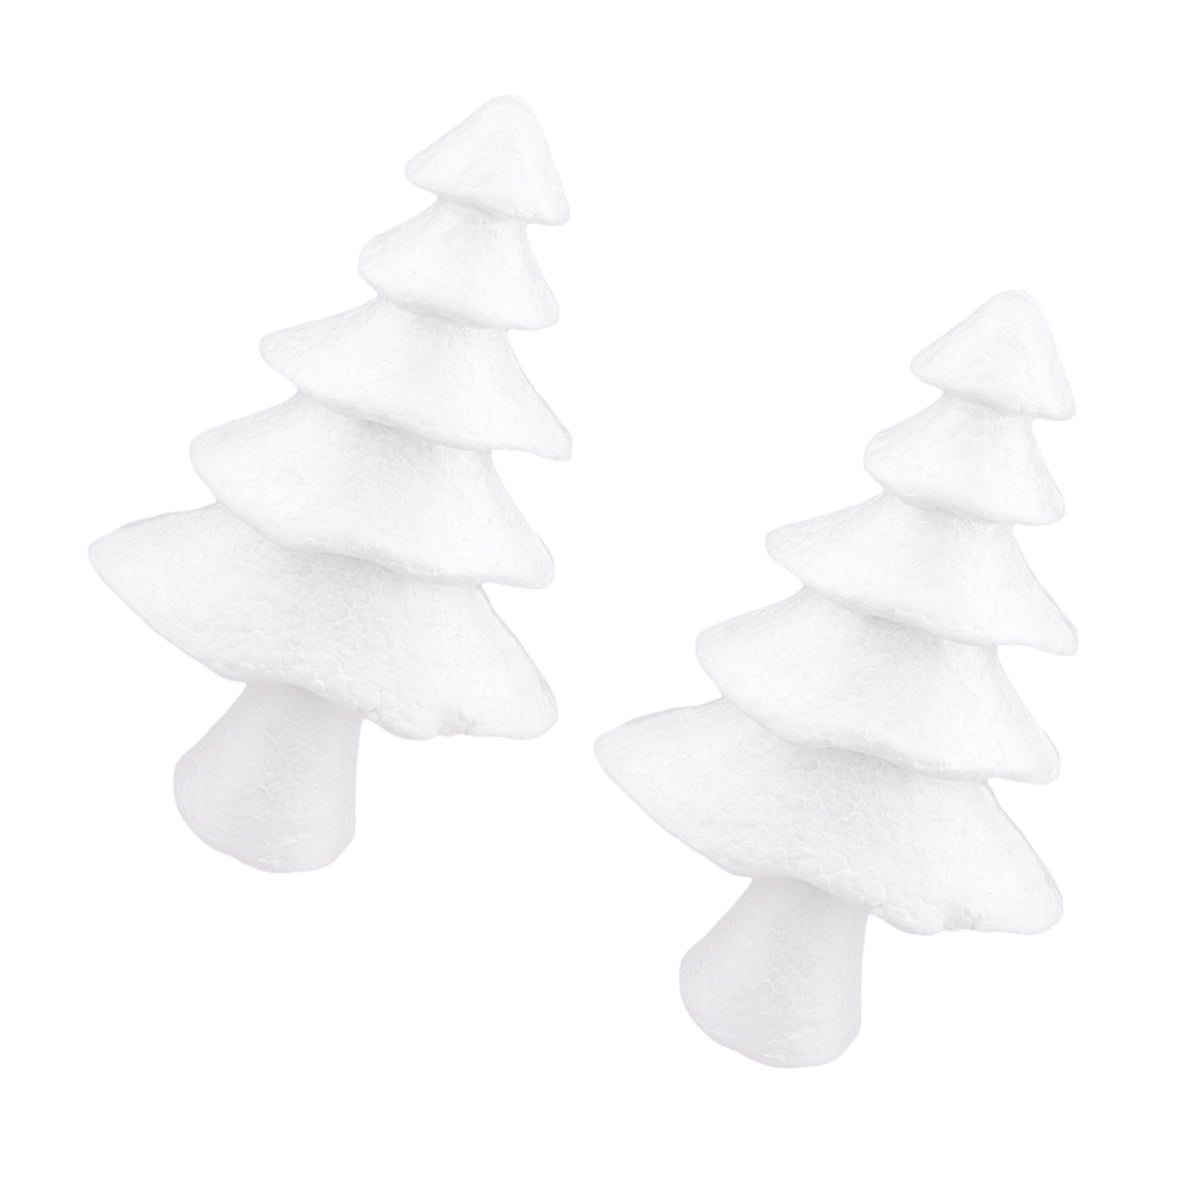 Foam Cone Cones Craft Christmas Tree Crafts Polystyrene Diy White Children  Balls Floral Shapes For works manuals - AliExpress